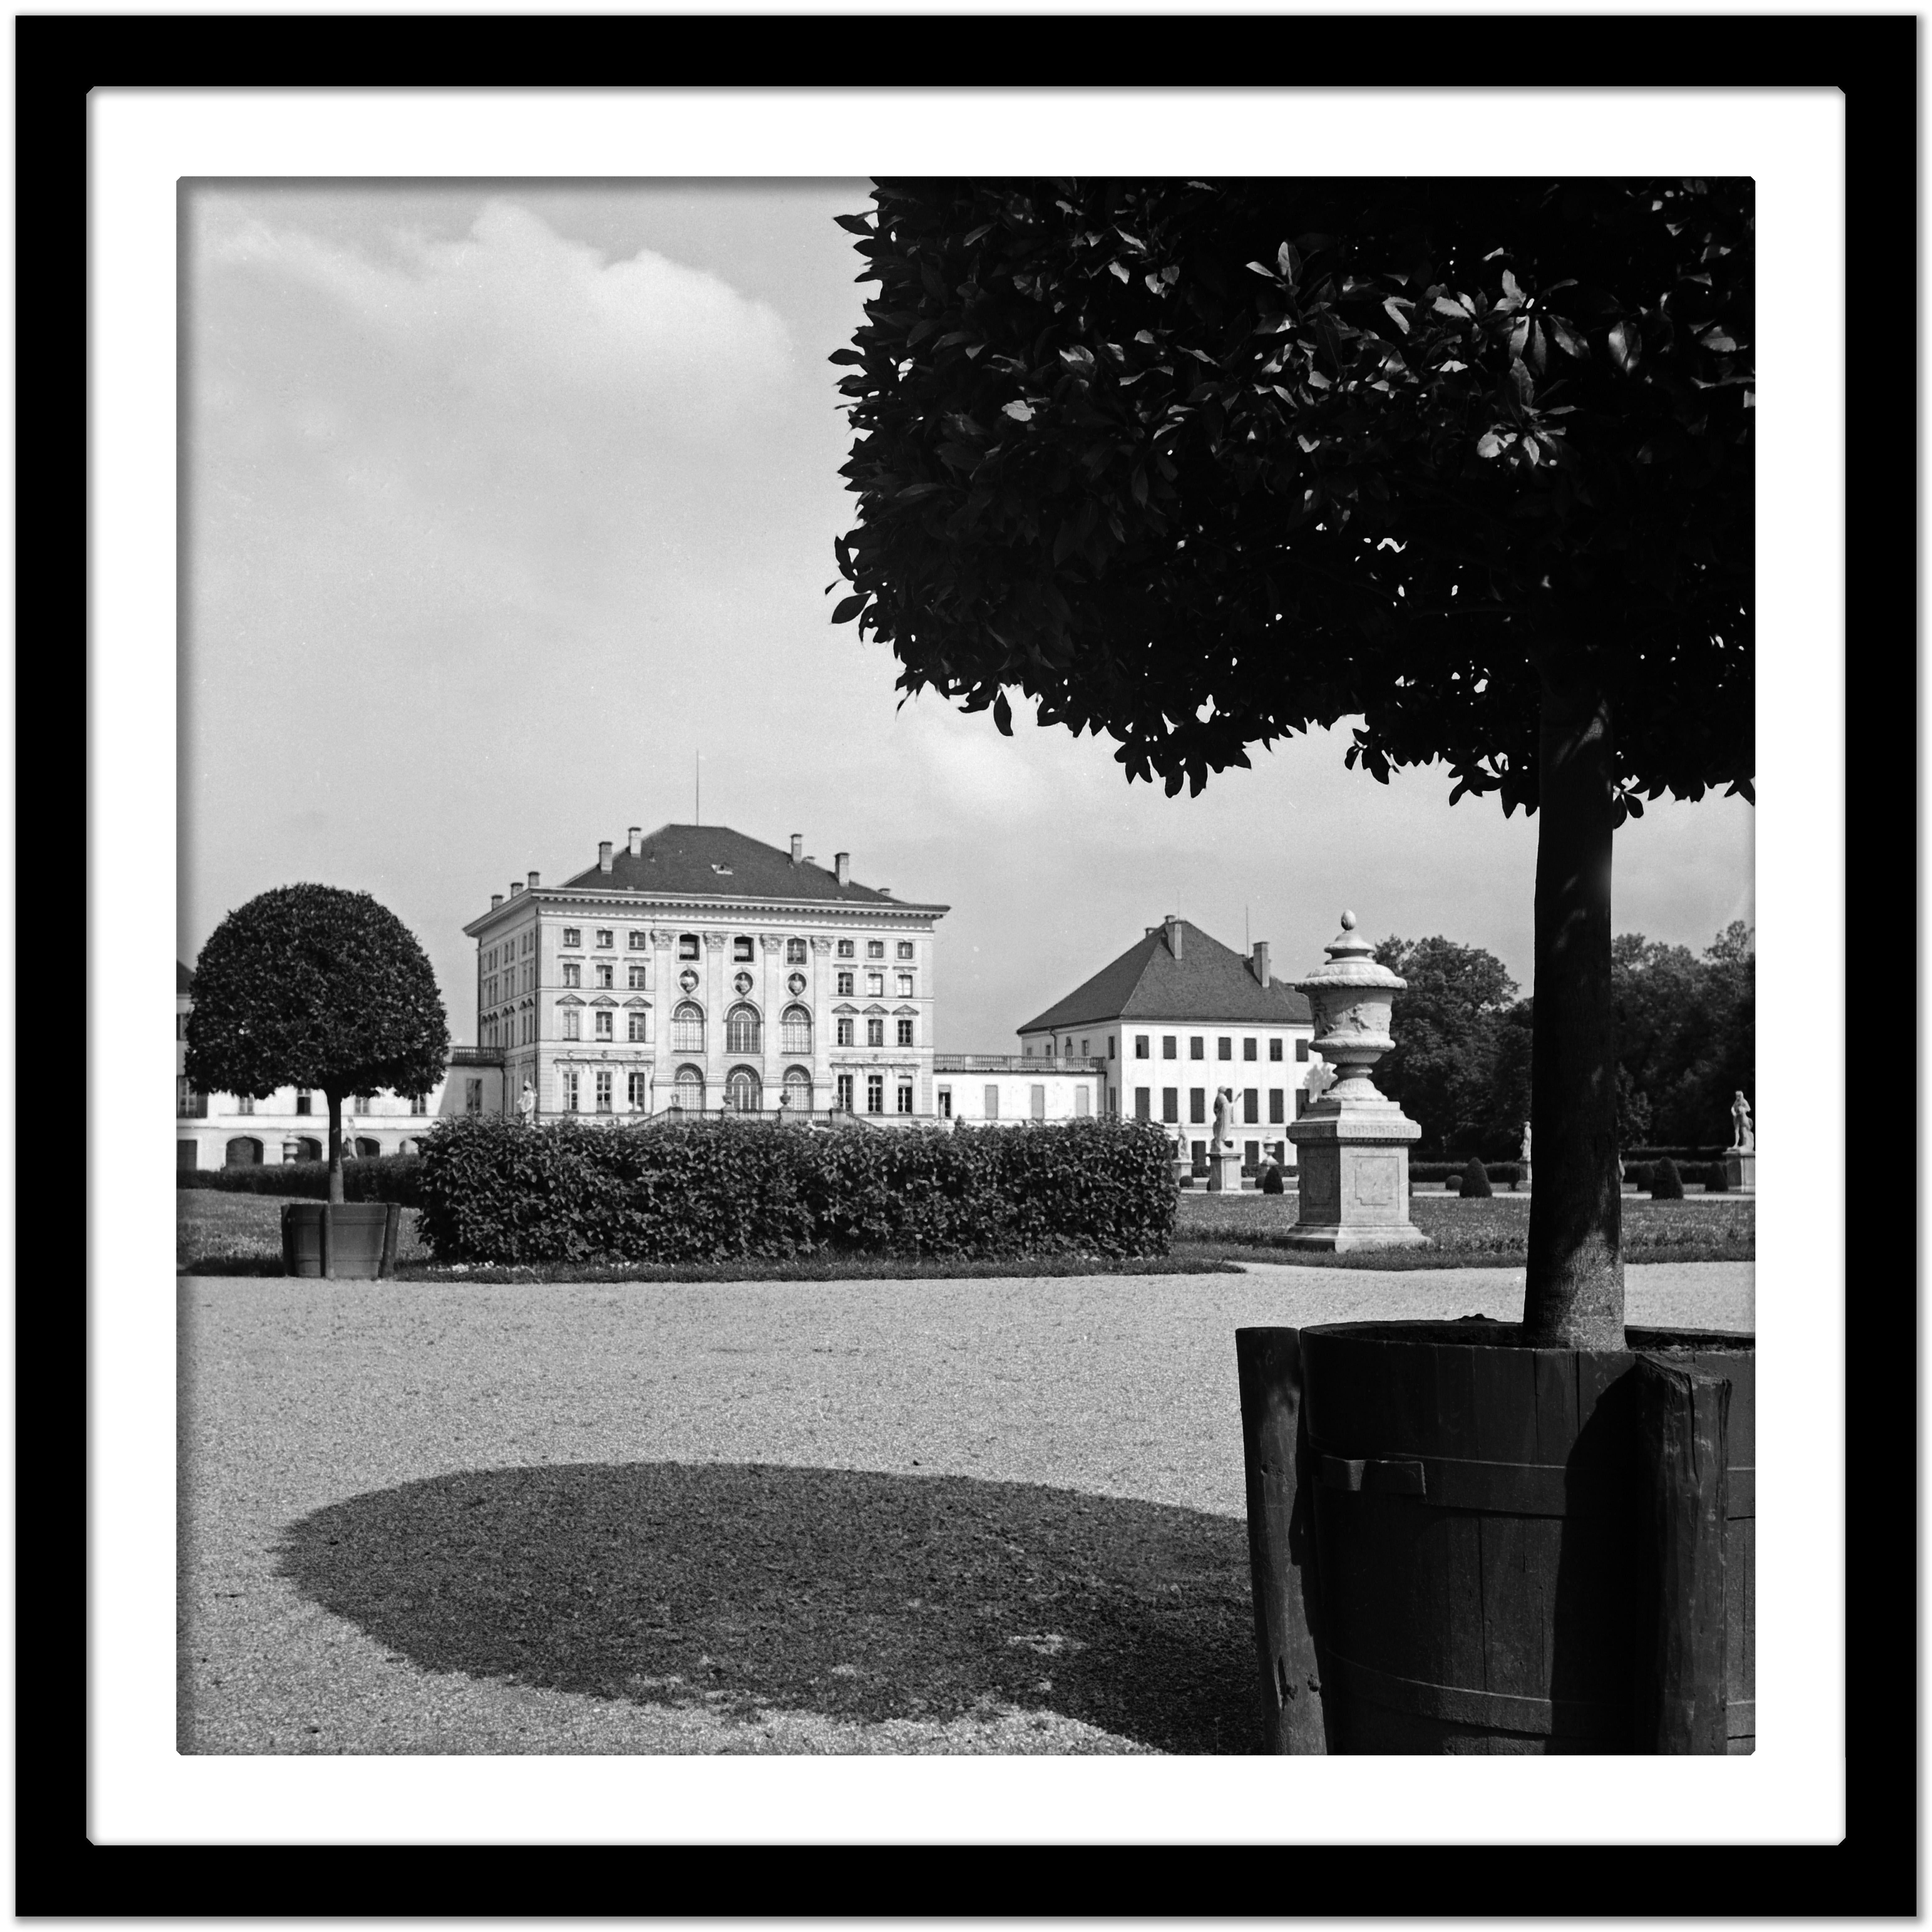 Park of Nymphenburg castle in the West of Munich, Germany 1937, Printed Later - Modern Photograph by Karl Heinrich Lämmel